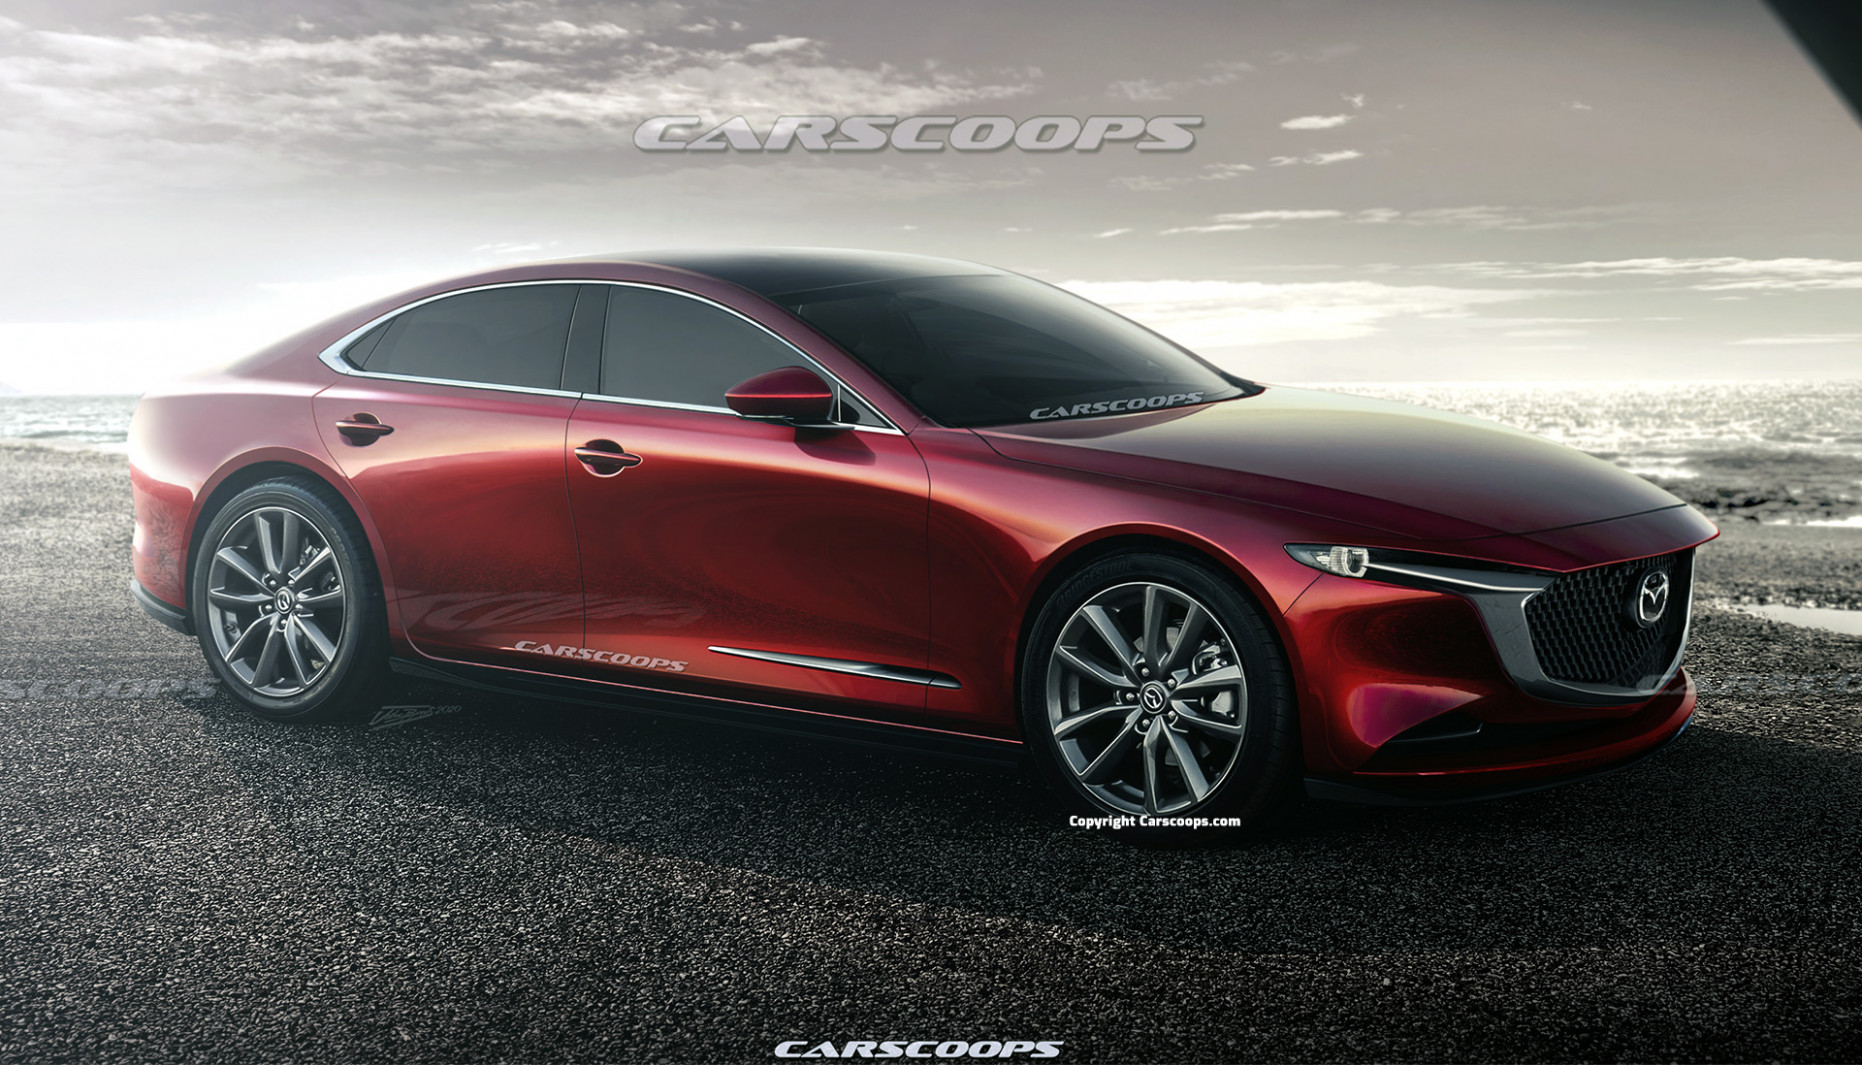 Price, Design and Review When Is The 2023 Mazda 6 Coming Out